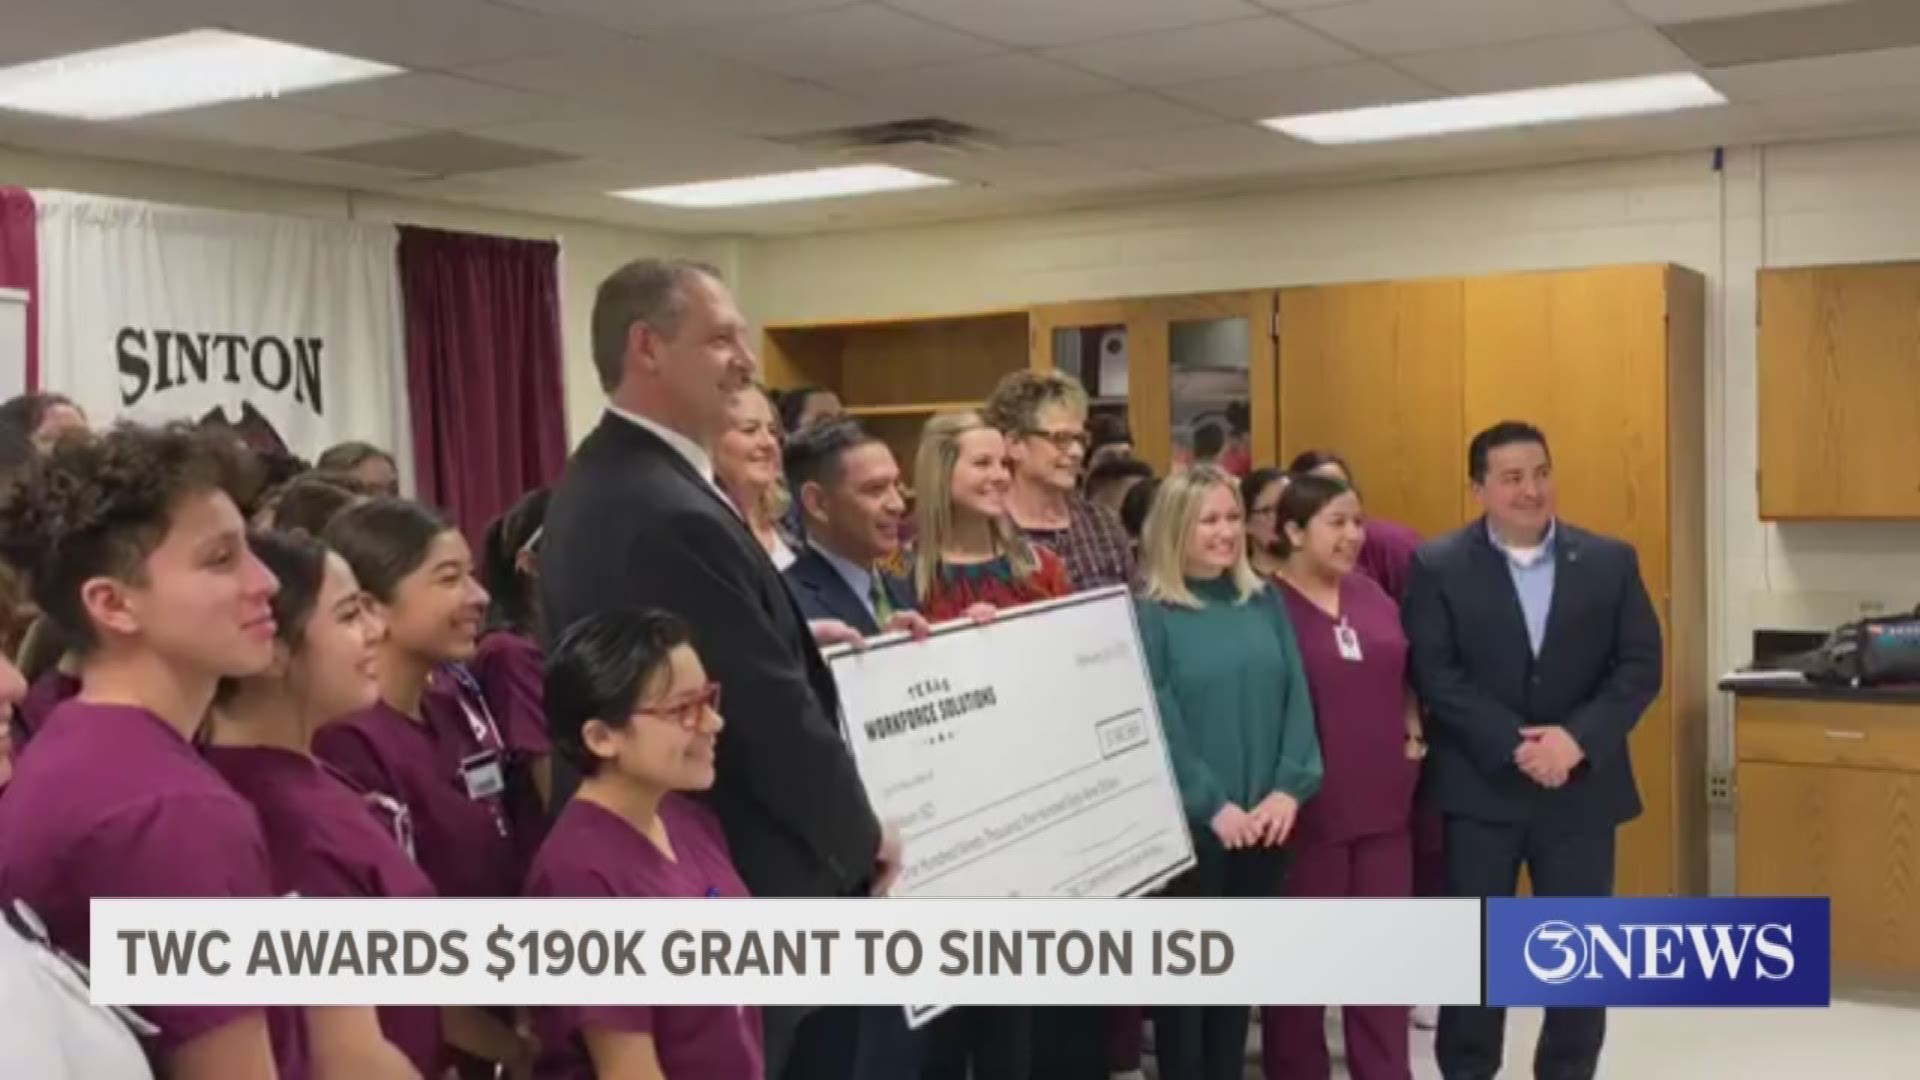 The Jobs and Education (JET) Grant was awarded to the district by the Texas Workforce Commission (TWC) on Wednesday, February 26.